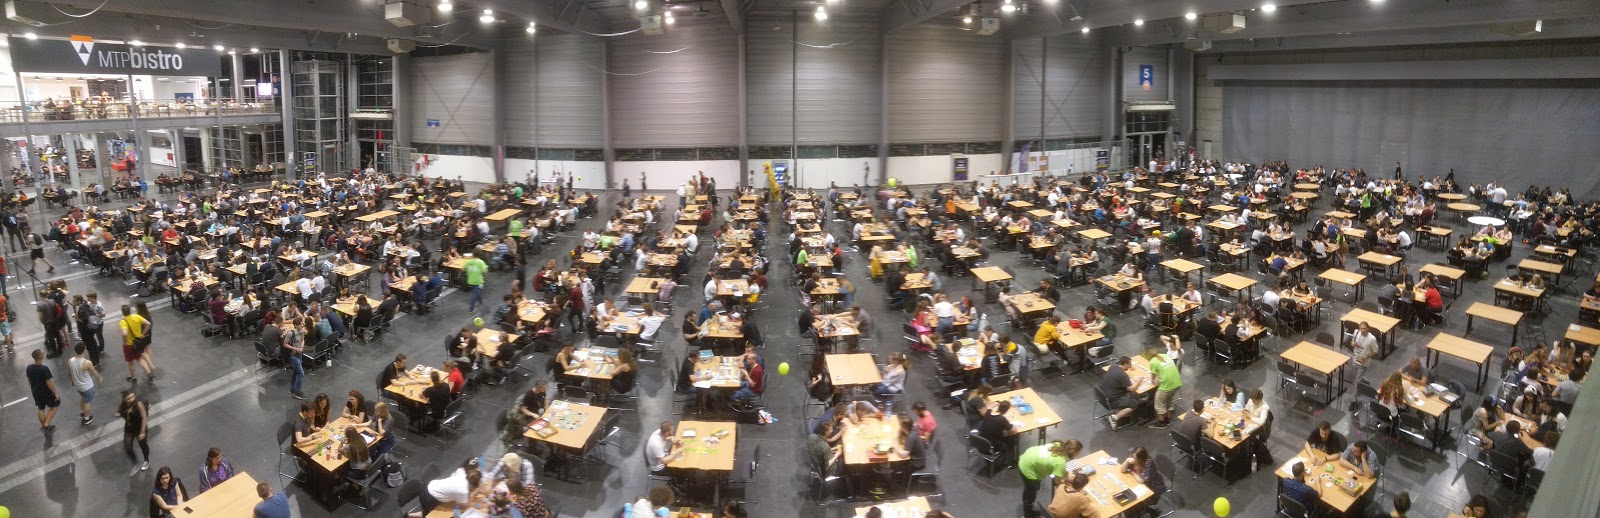 This is just a portion of people who decided to spend their Friday evening playing tabletop games. - 2019-05-09